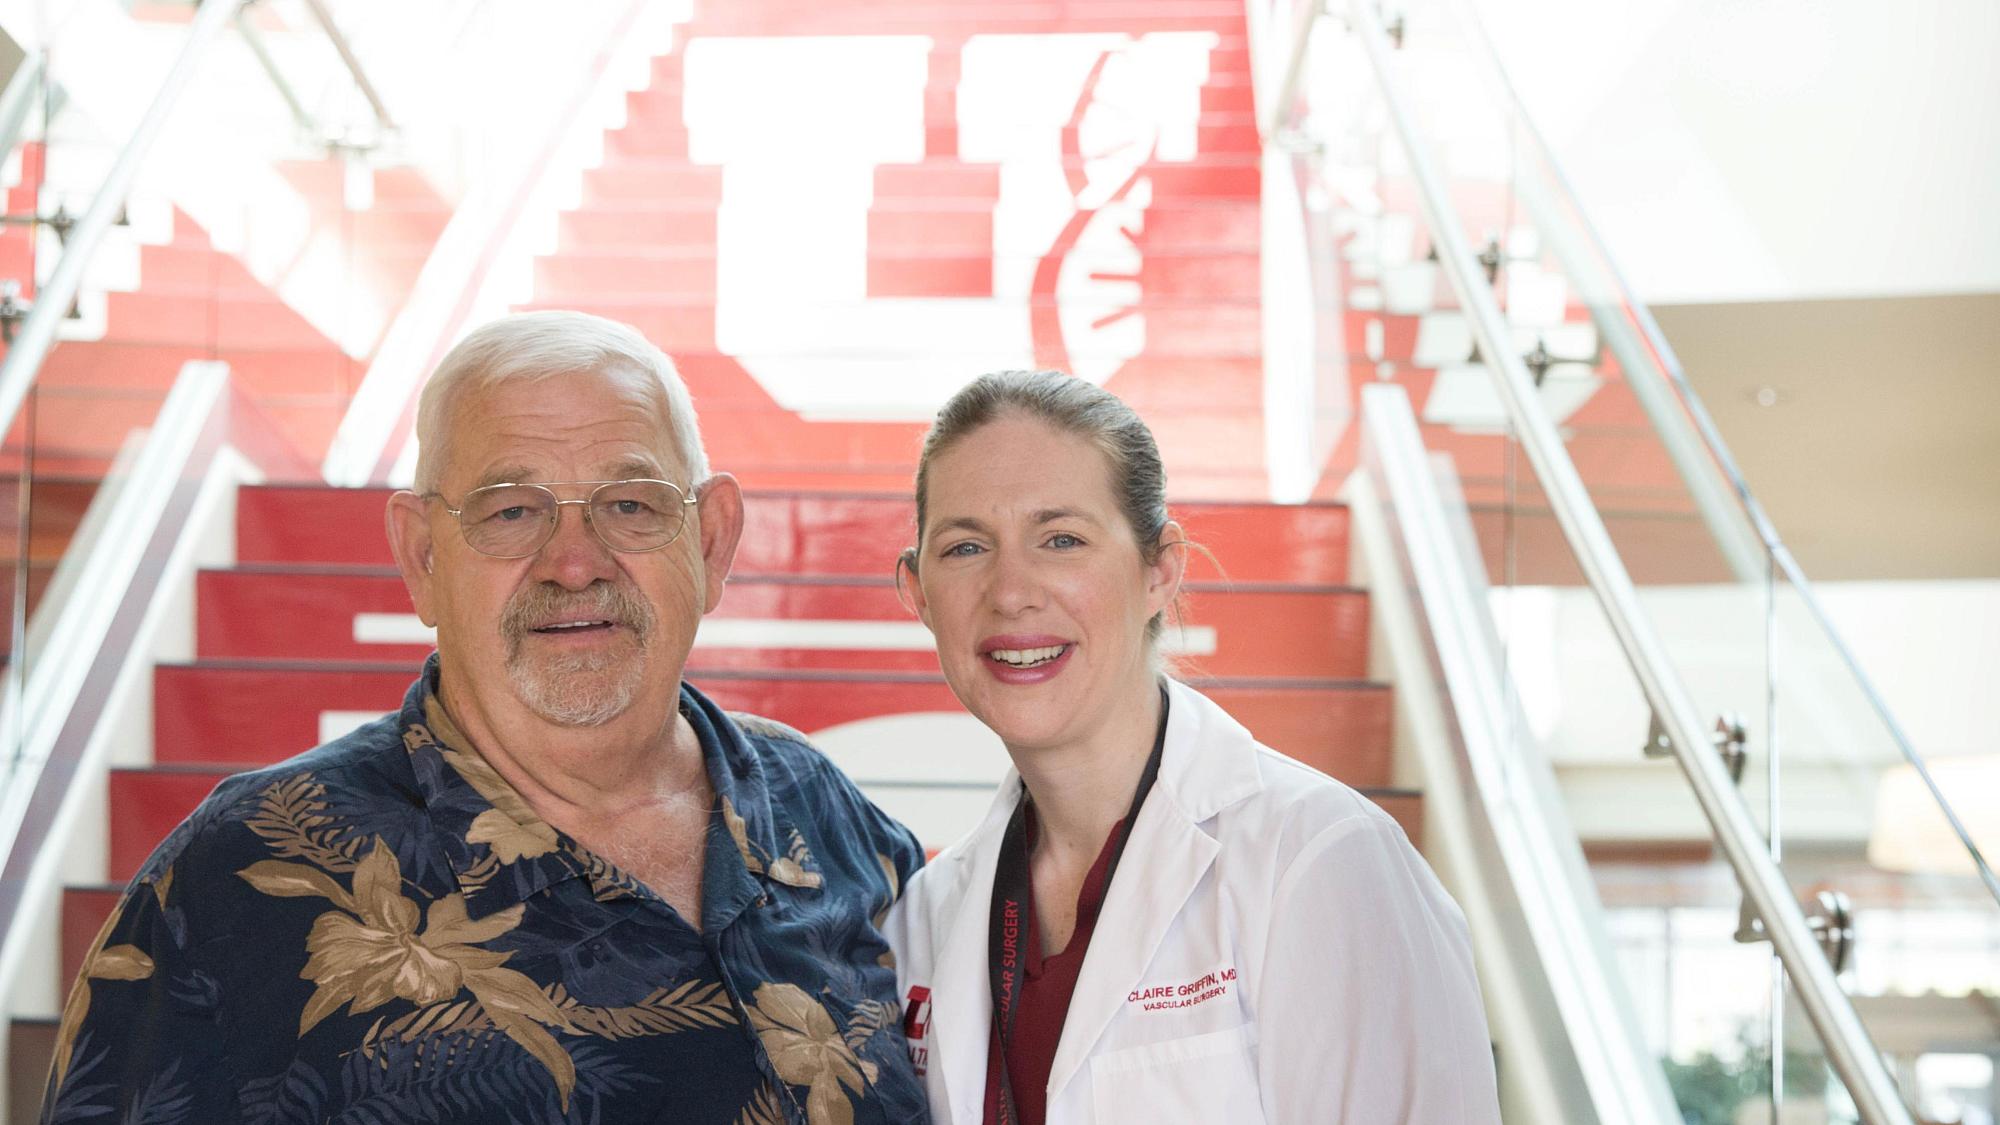 Patient Tom Stover and aortic disease specialist Claire Giffin, MD